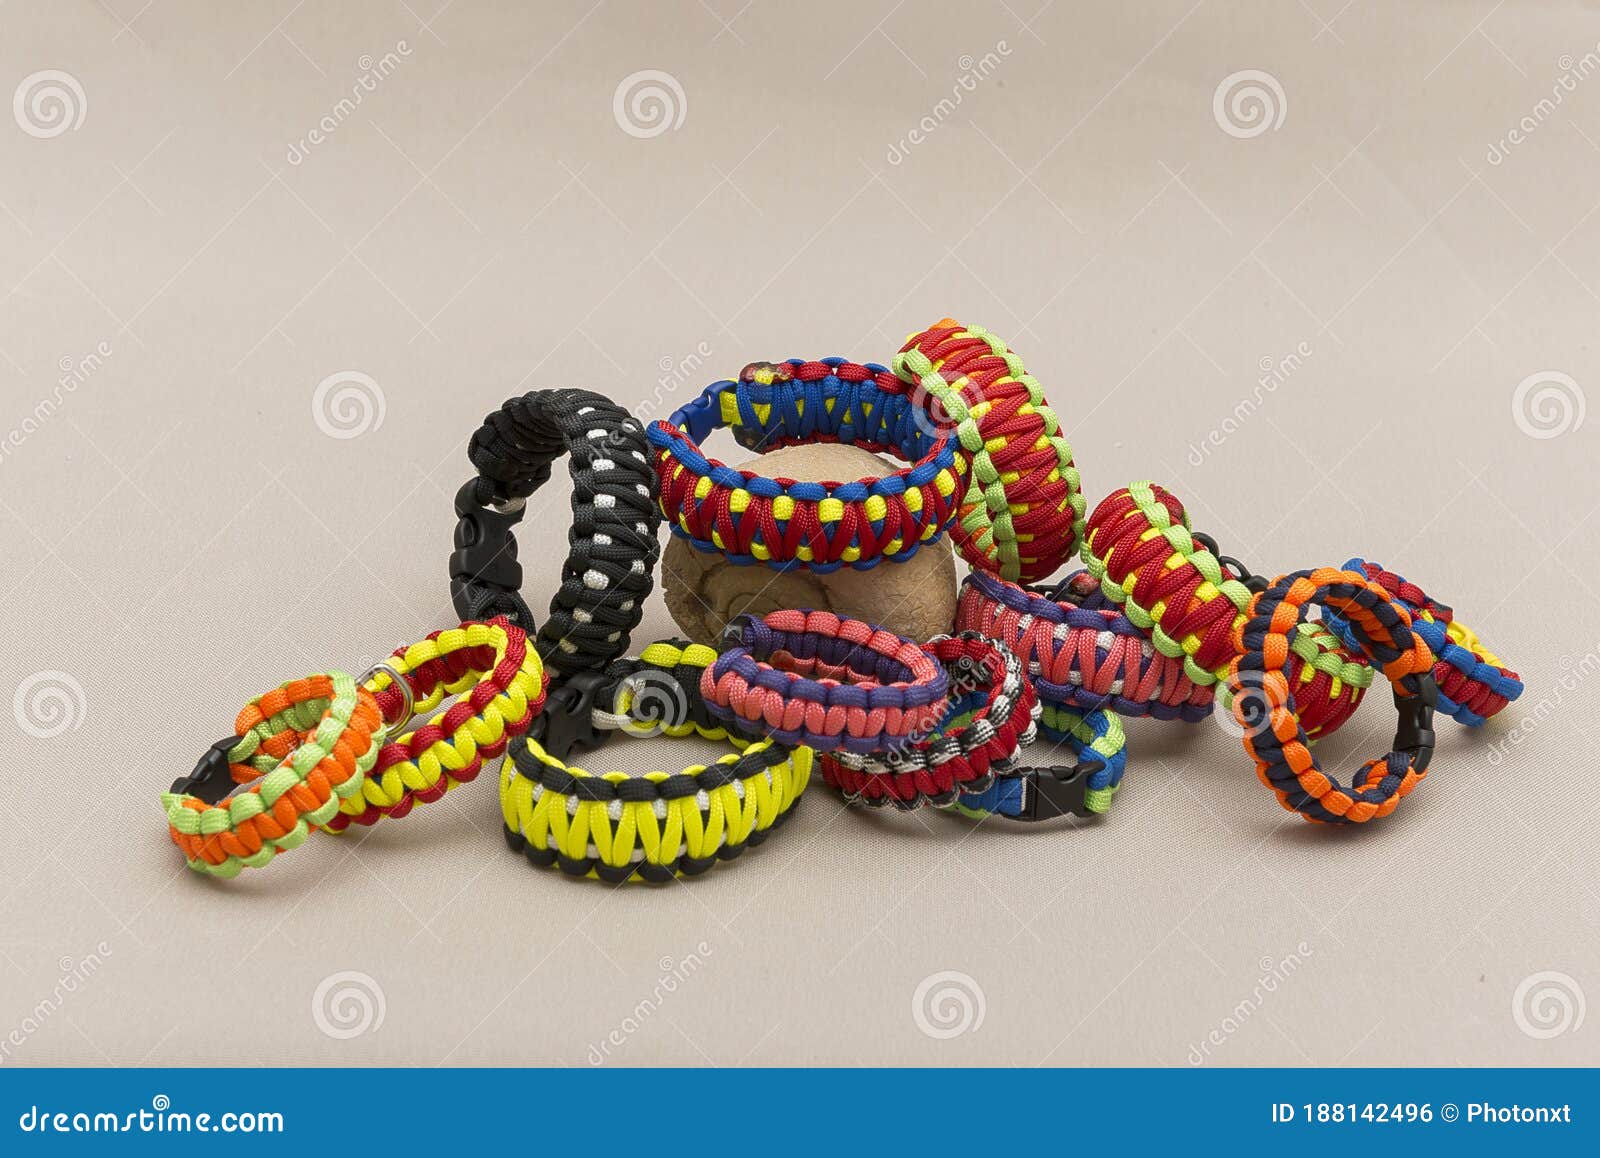 Colorful Paracord Bracelet Placed Near A Fossilized Shell, Isolated On A Light Brown Background ...